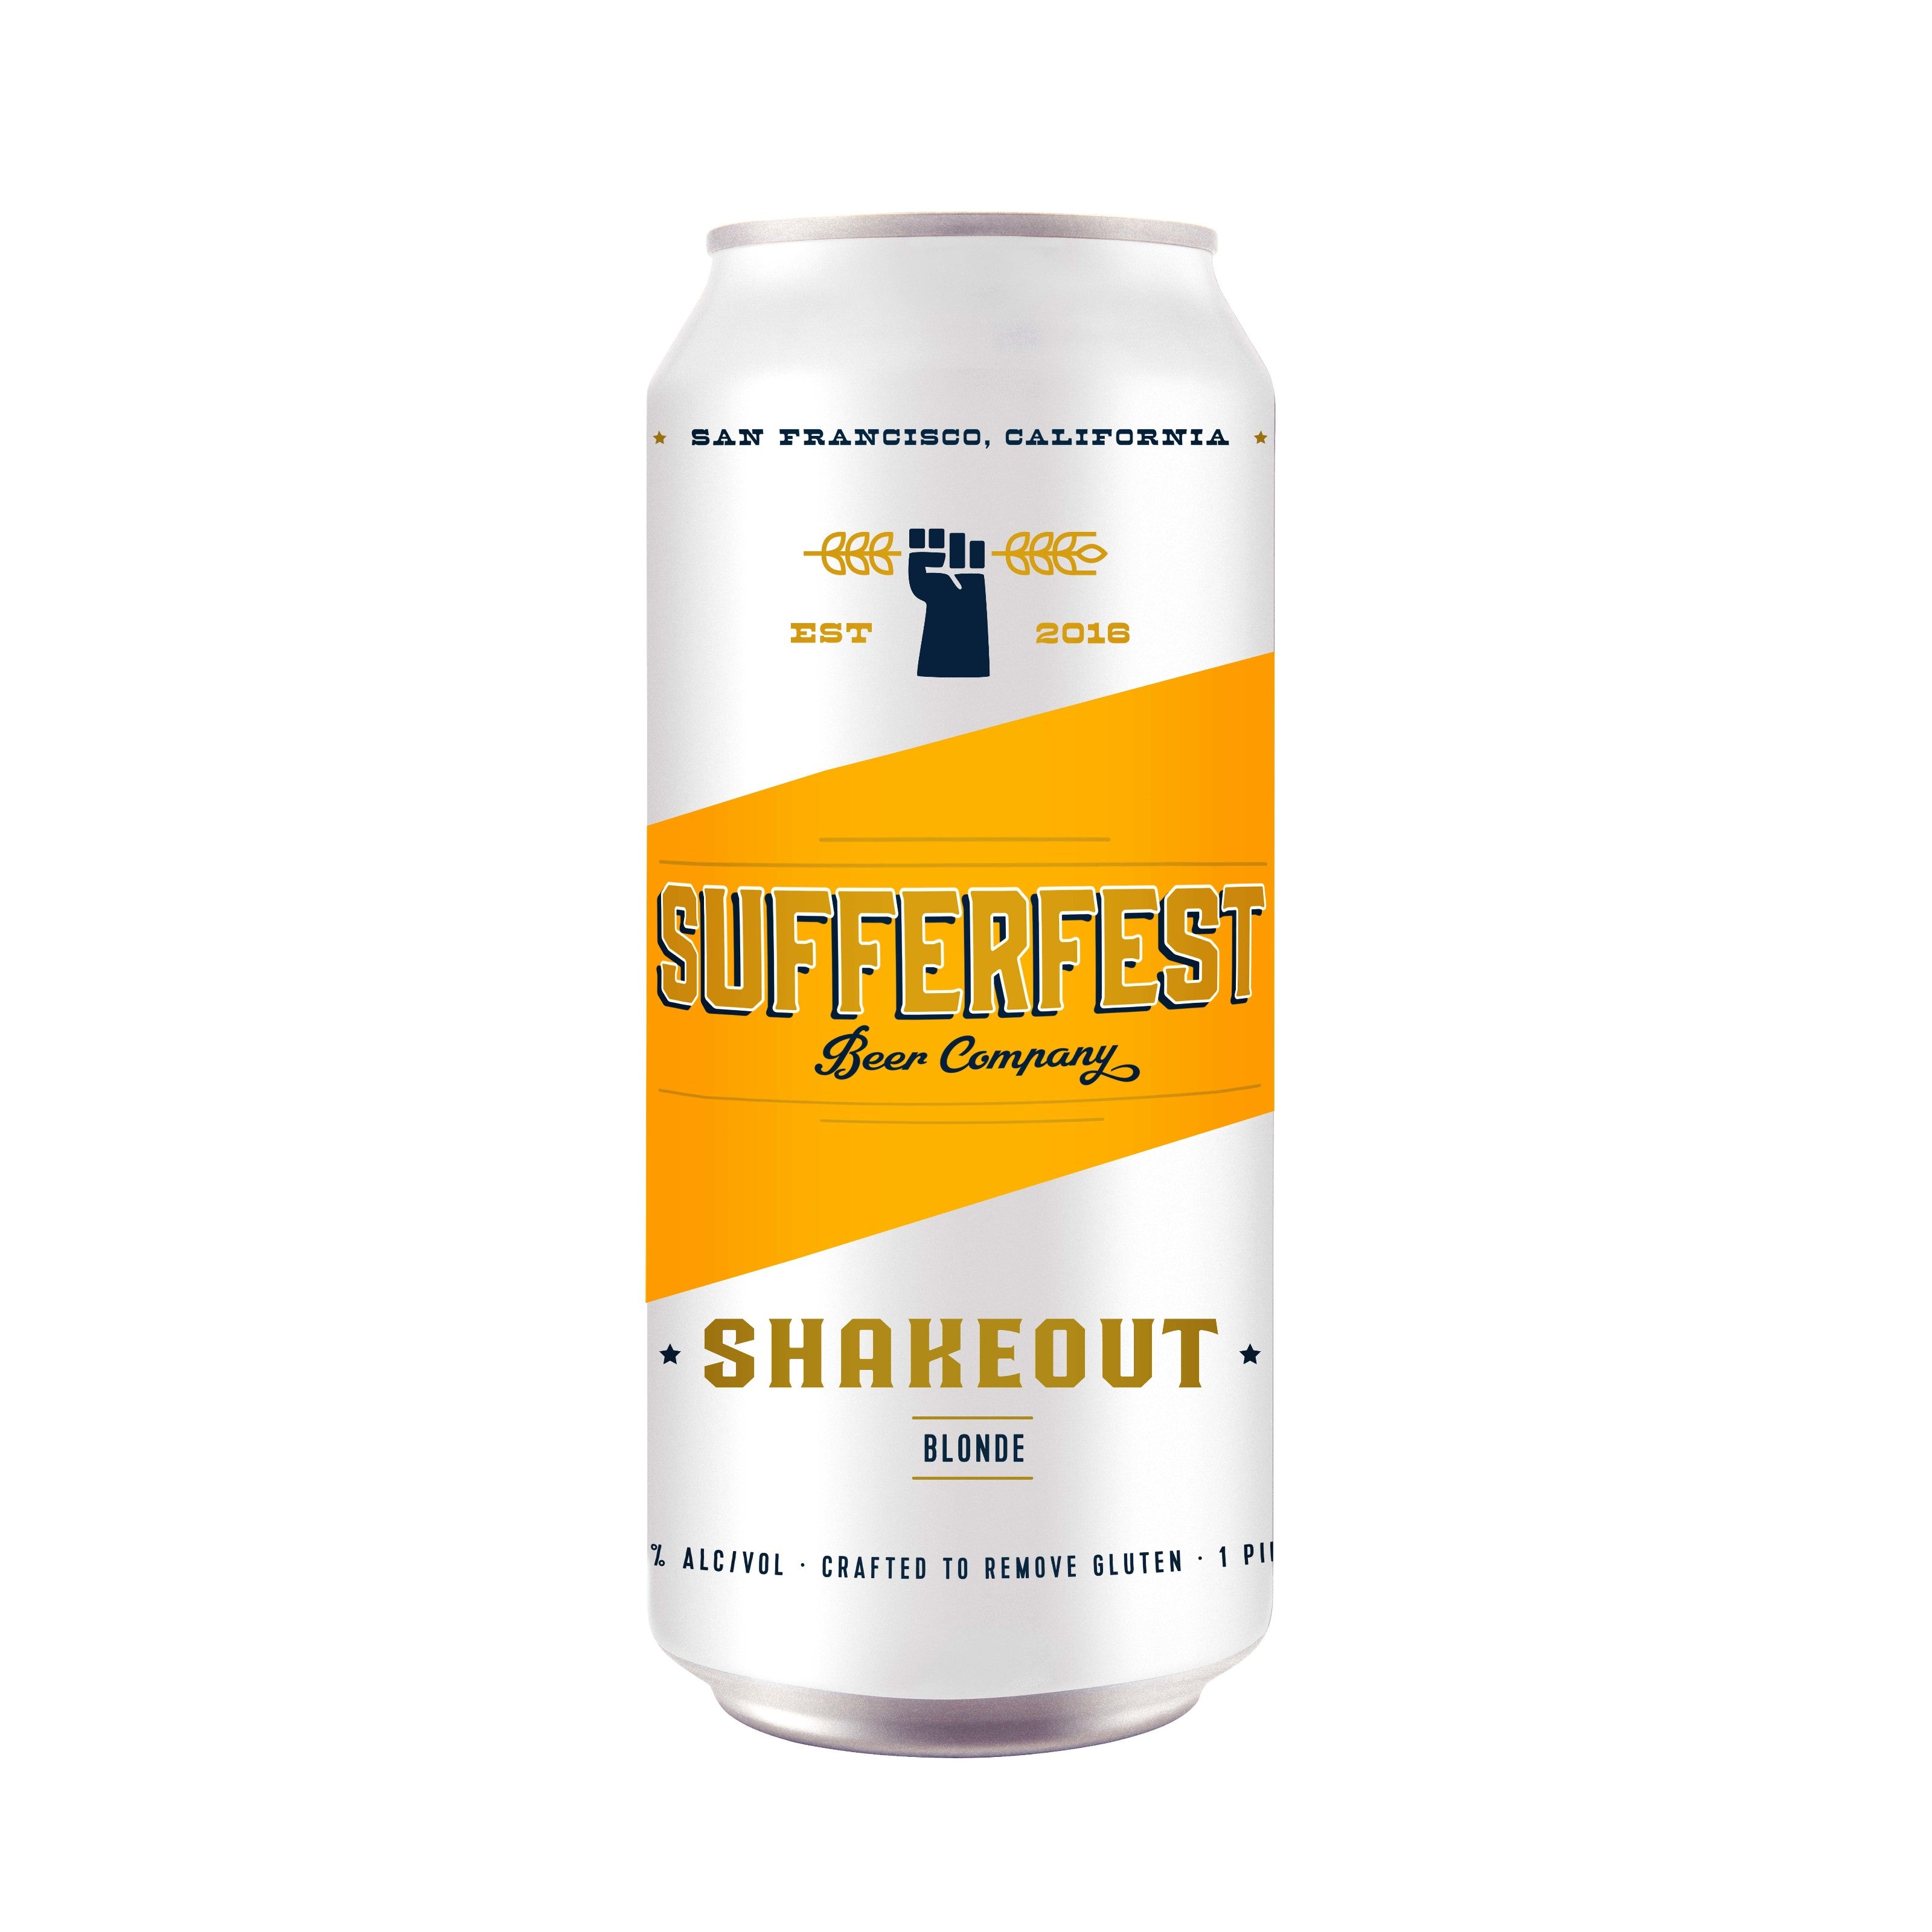 Sufferfest Shakeout Blonde (Gluten Removed) 12oz can